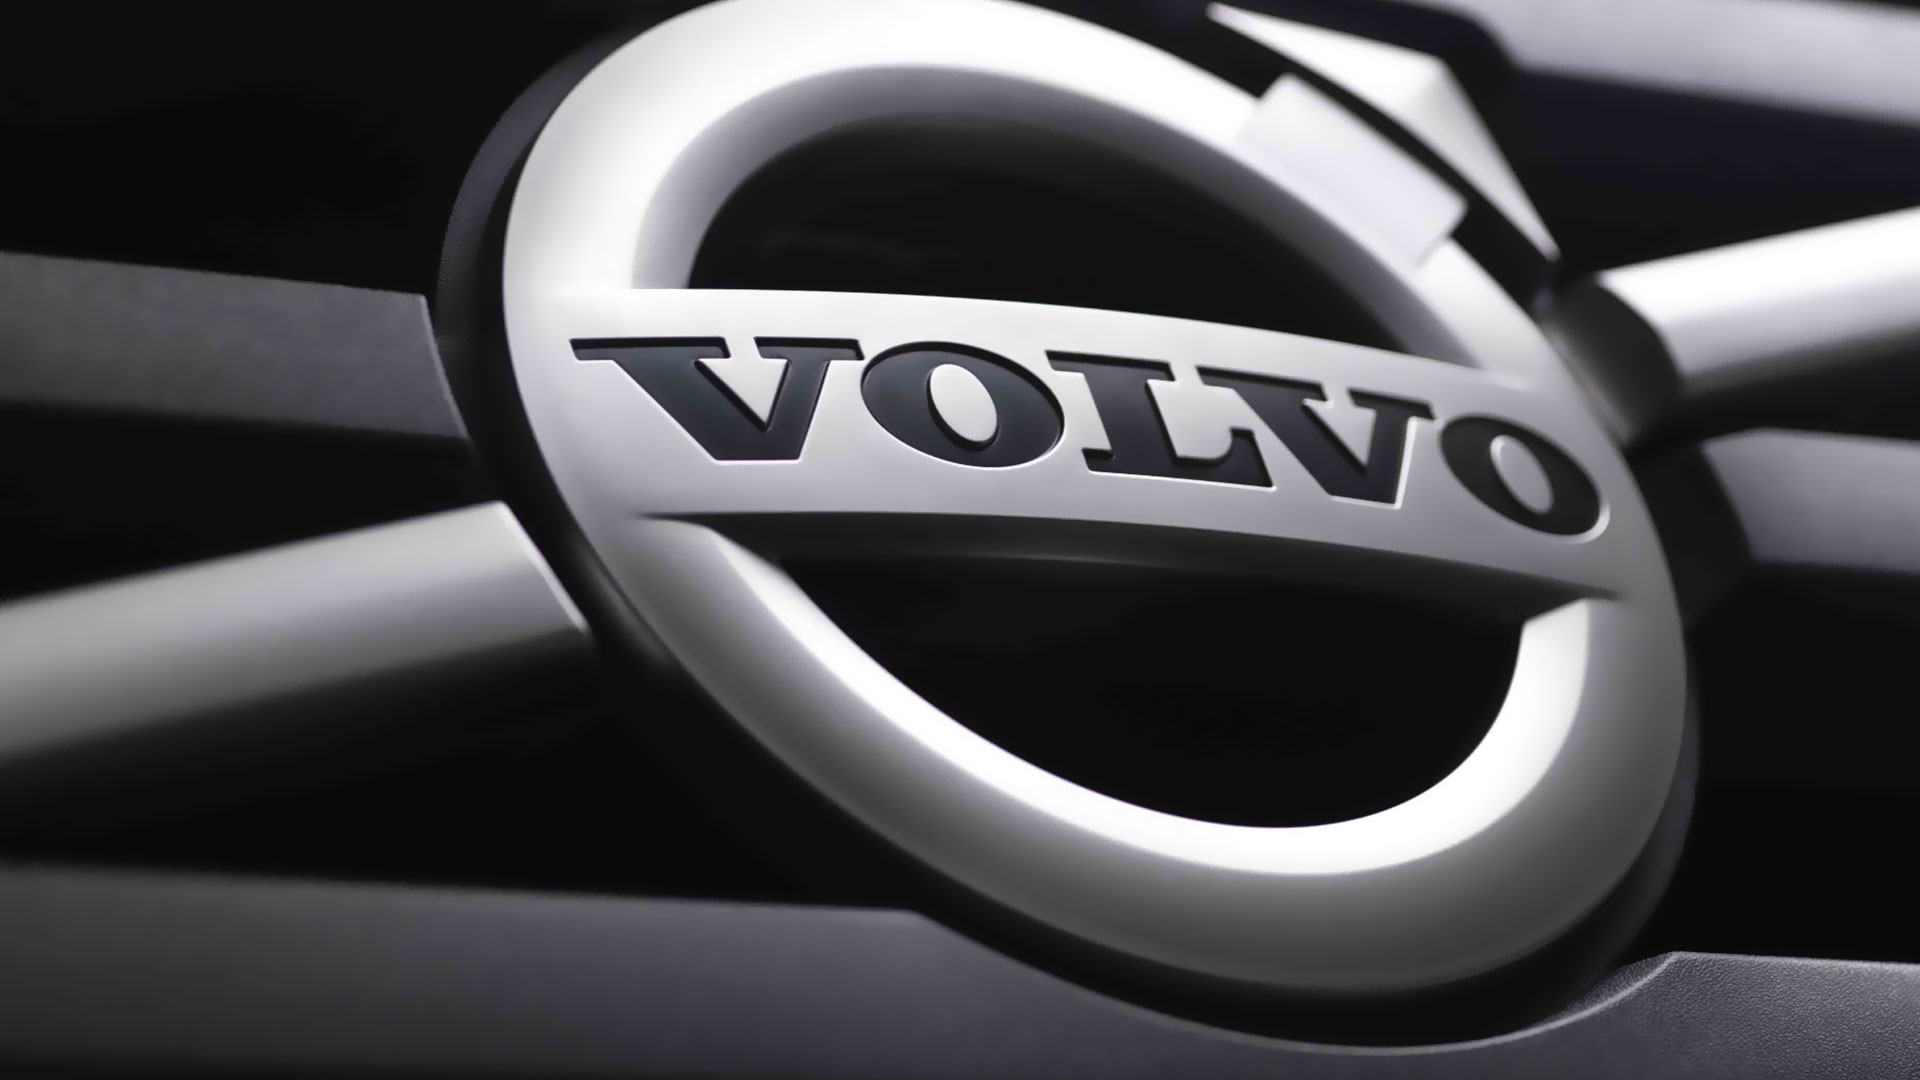 1920x1080 Volvo Logo Car Wallpaper For iphone